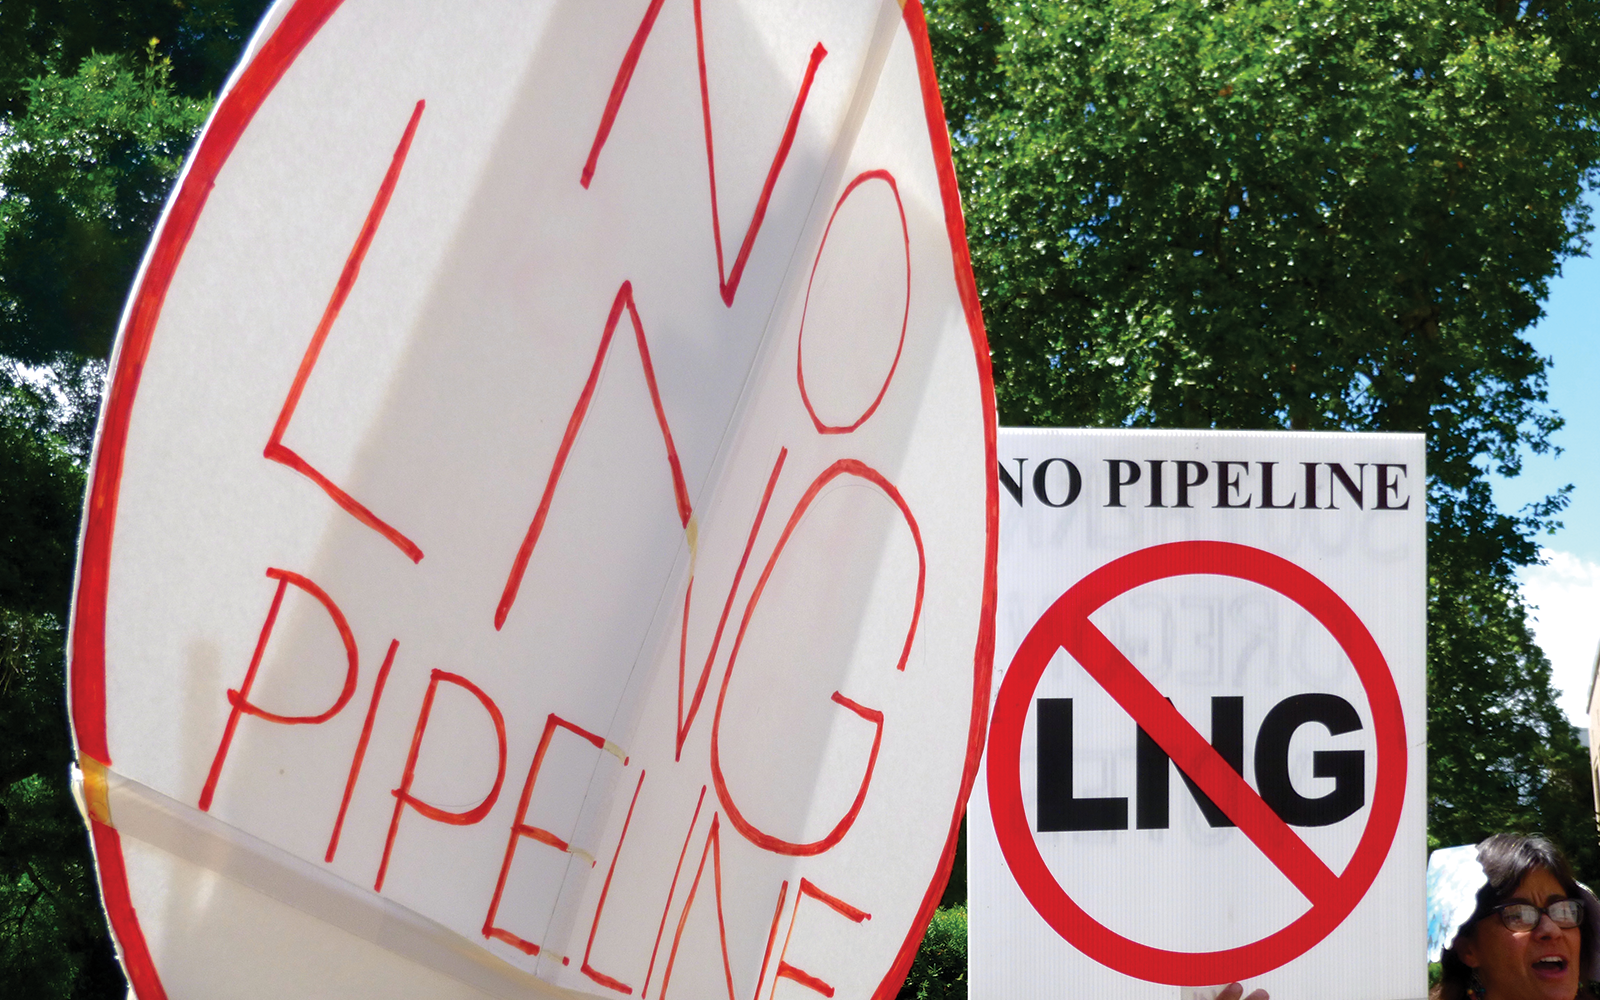 Press Release: Oregonians Demand Rehearing of Pipeline Project Approval